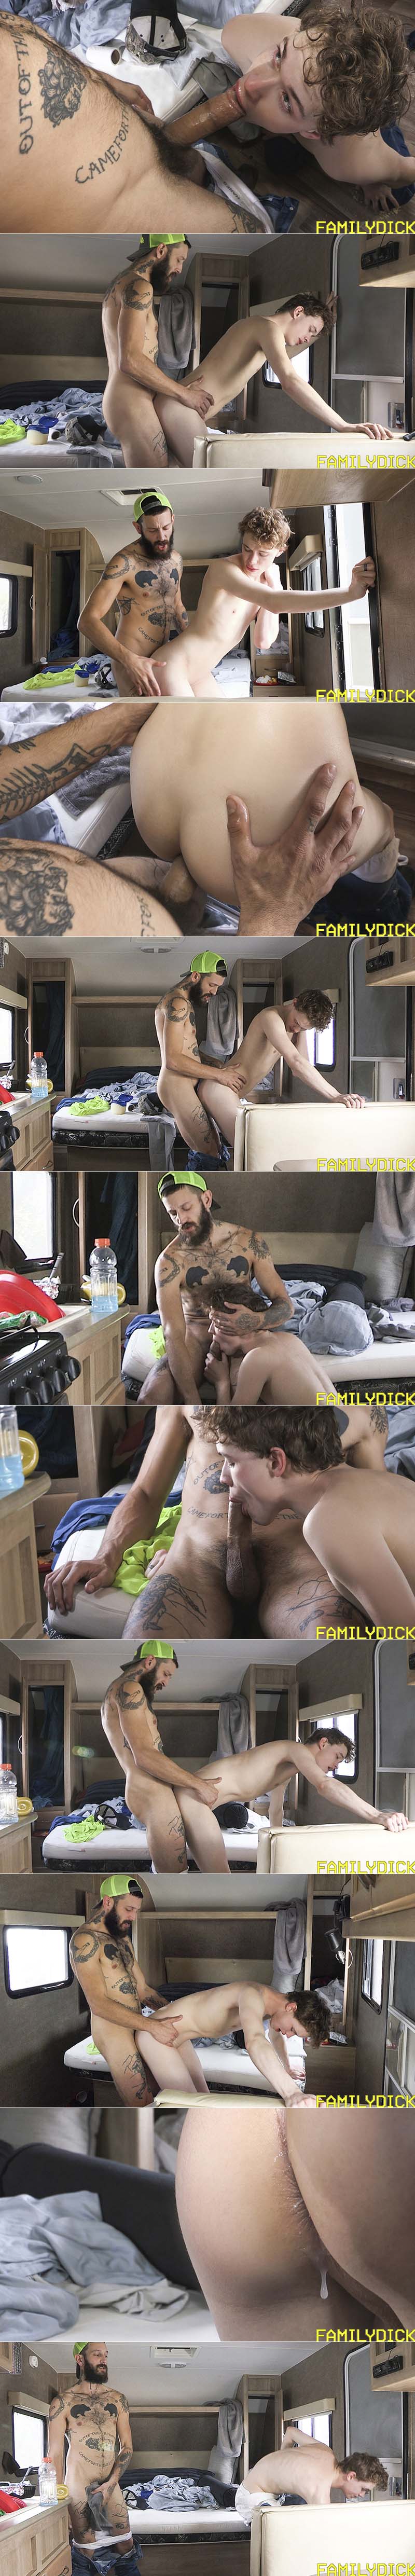 Raised In A Trailer, Chapter 1: SINGLE PARENT (with Matt Muck and Toby Muck) at FamilyDick